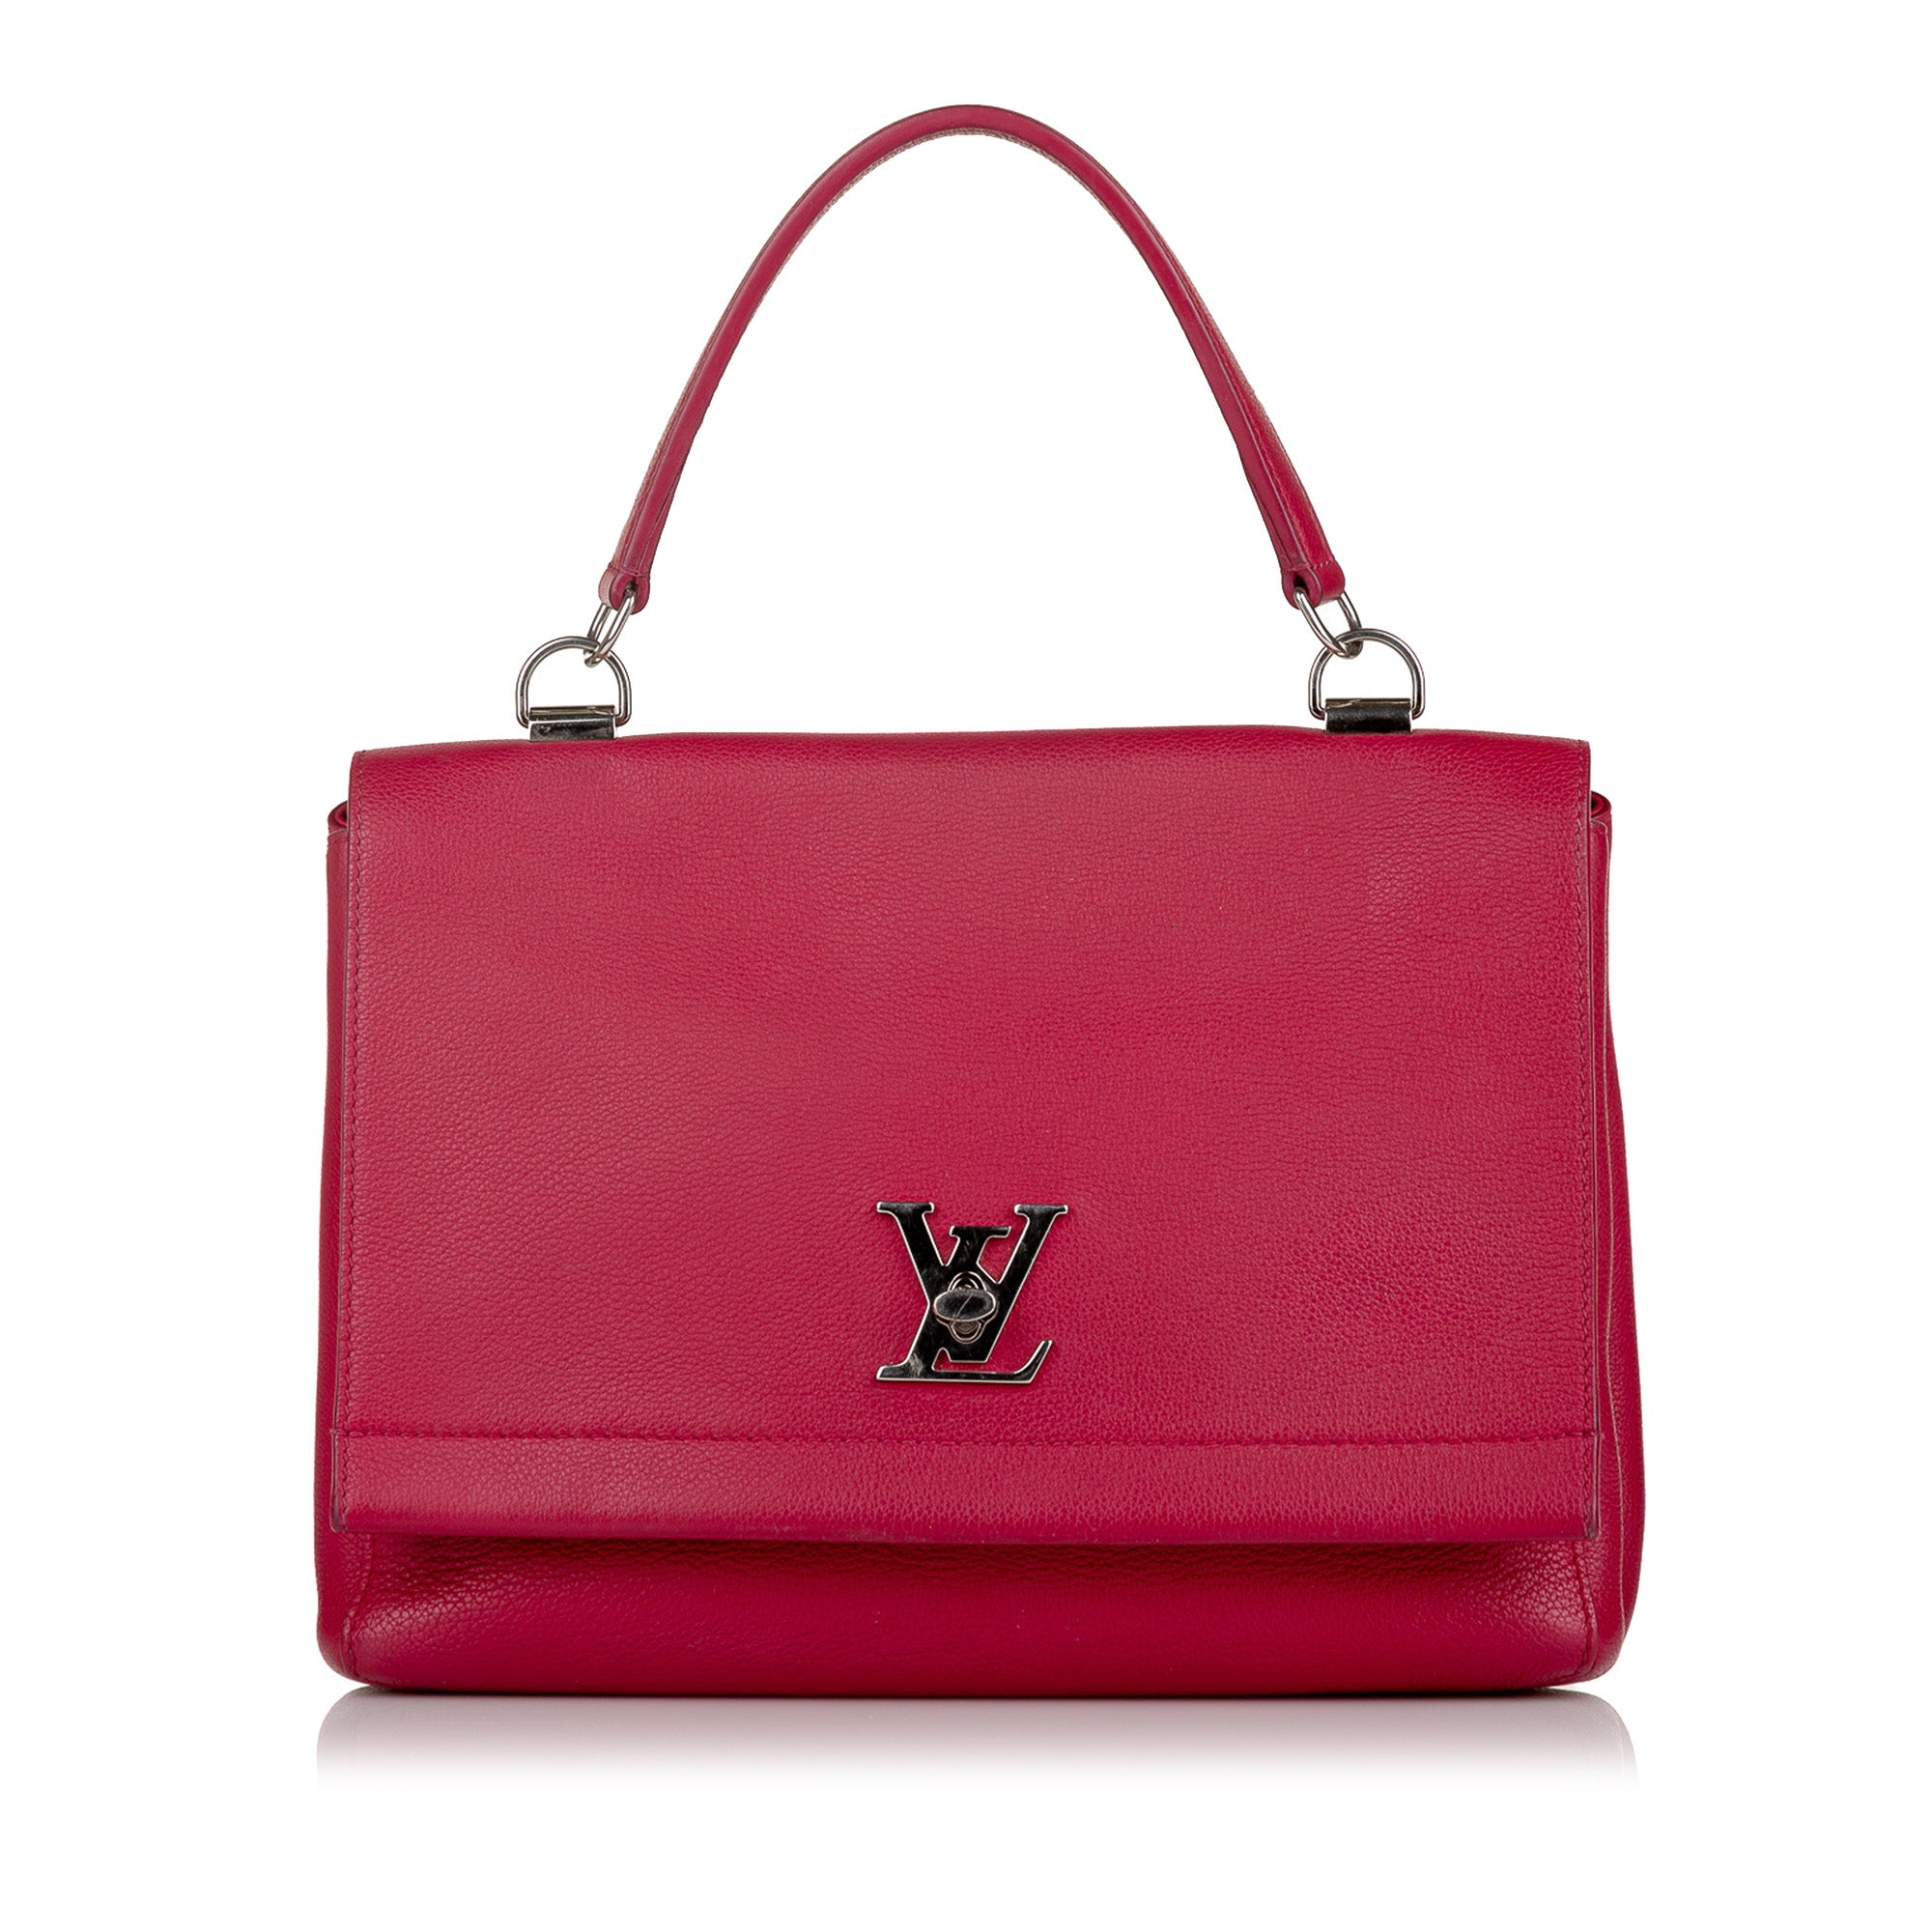 Louis Vuitton Pink Leather Lockme Backpack